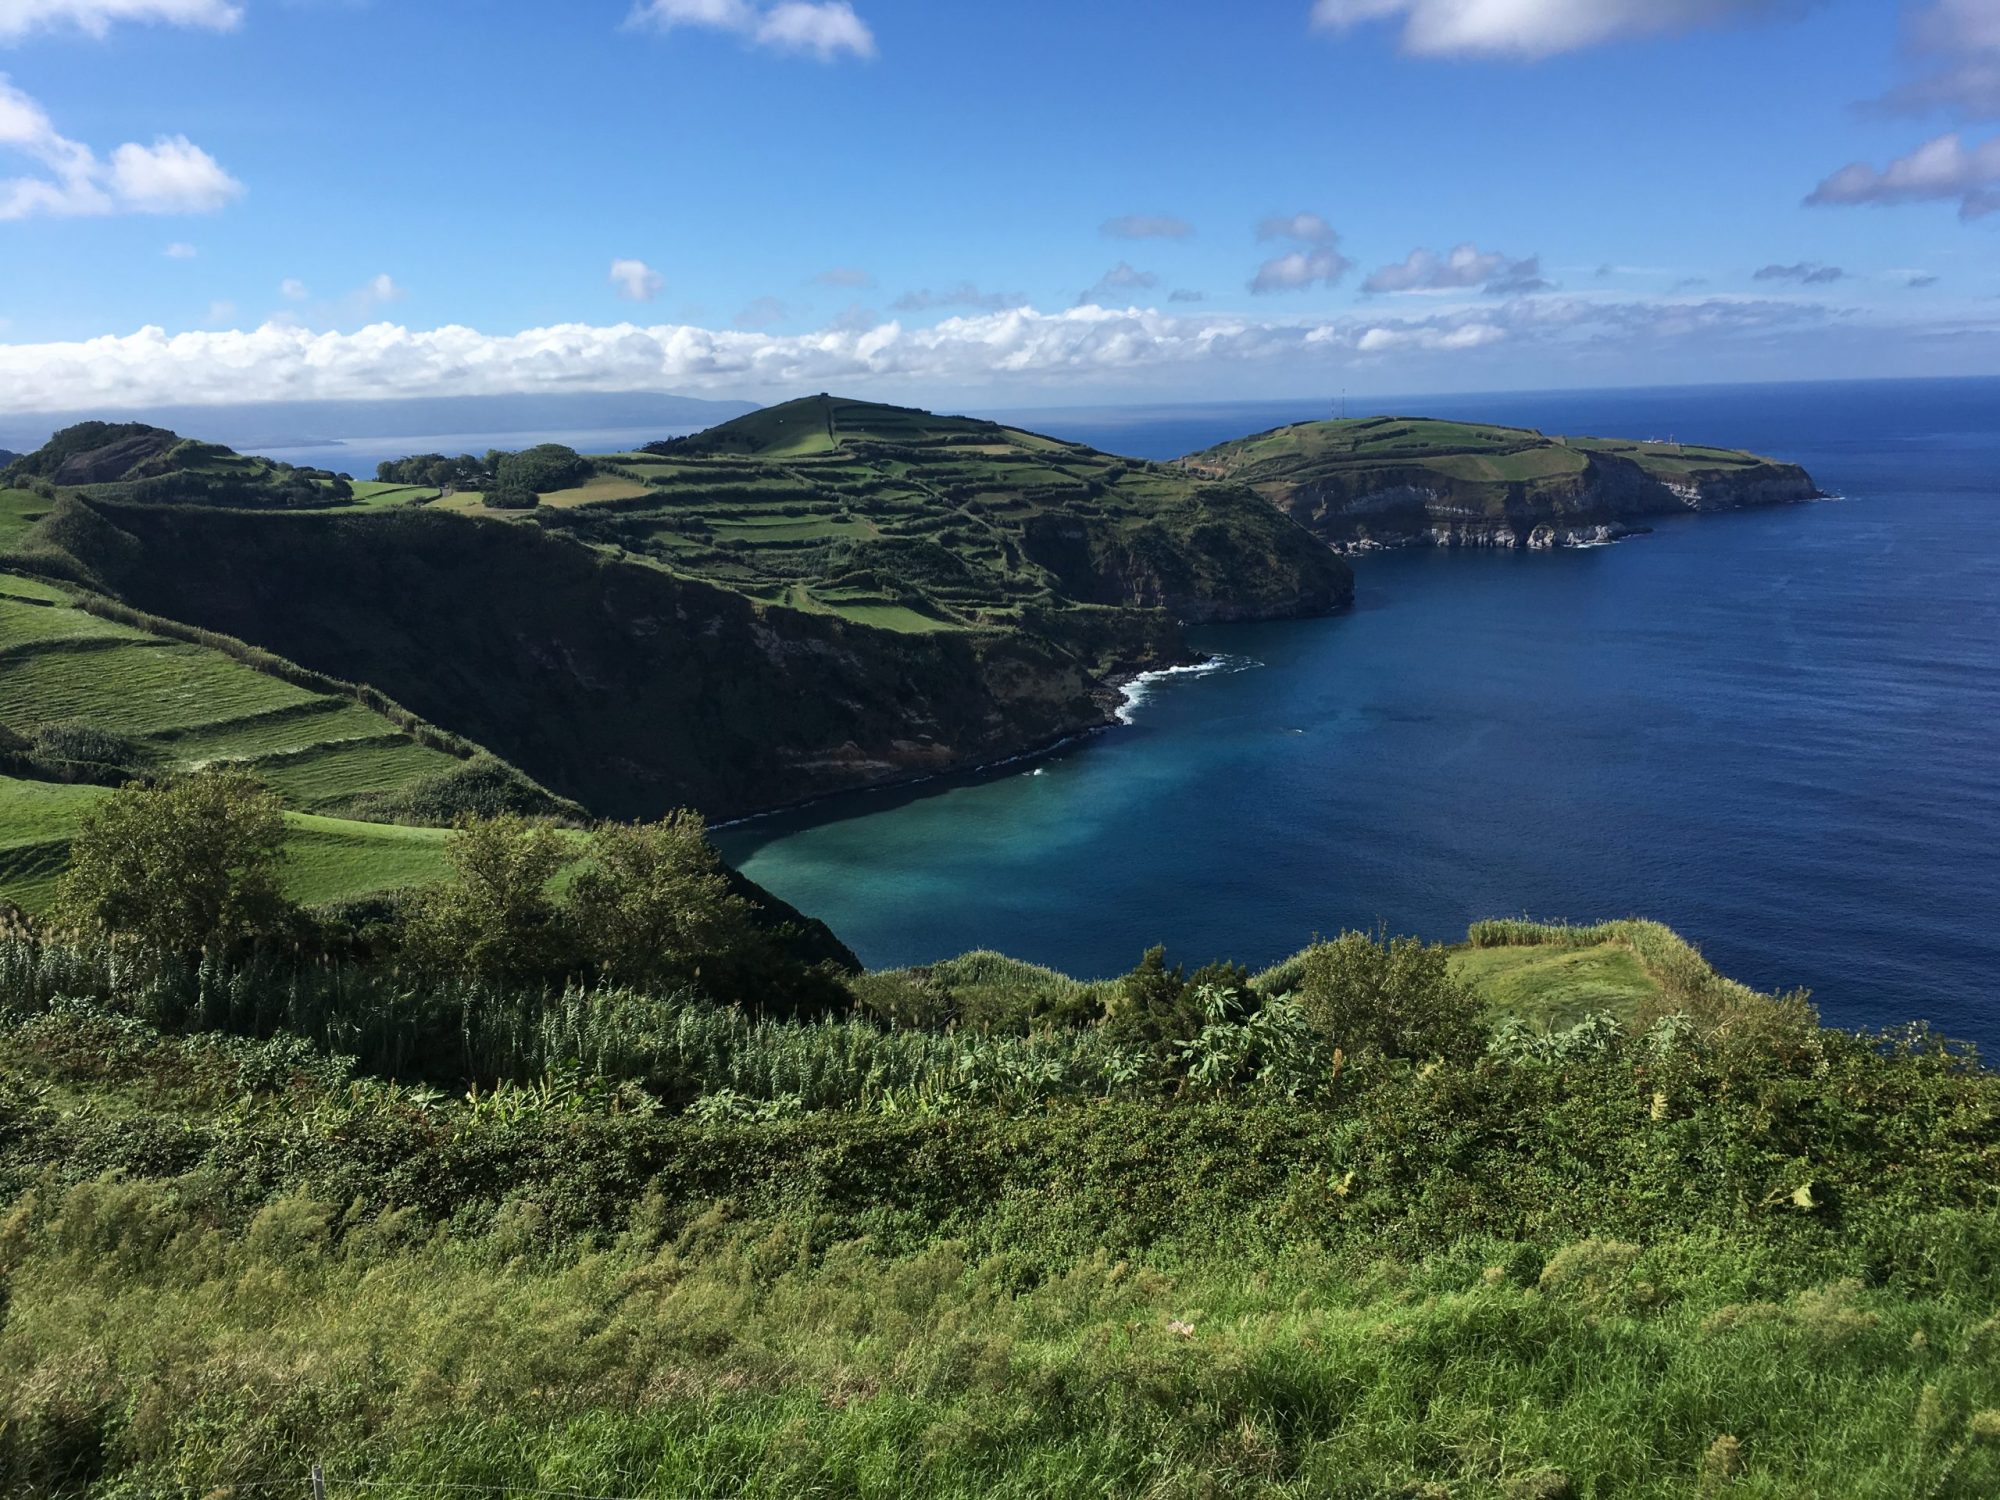 View from Sao Miguel in the Azores from Amanda Walkins